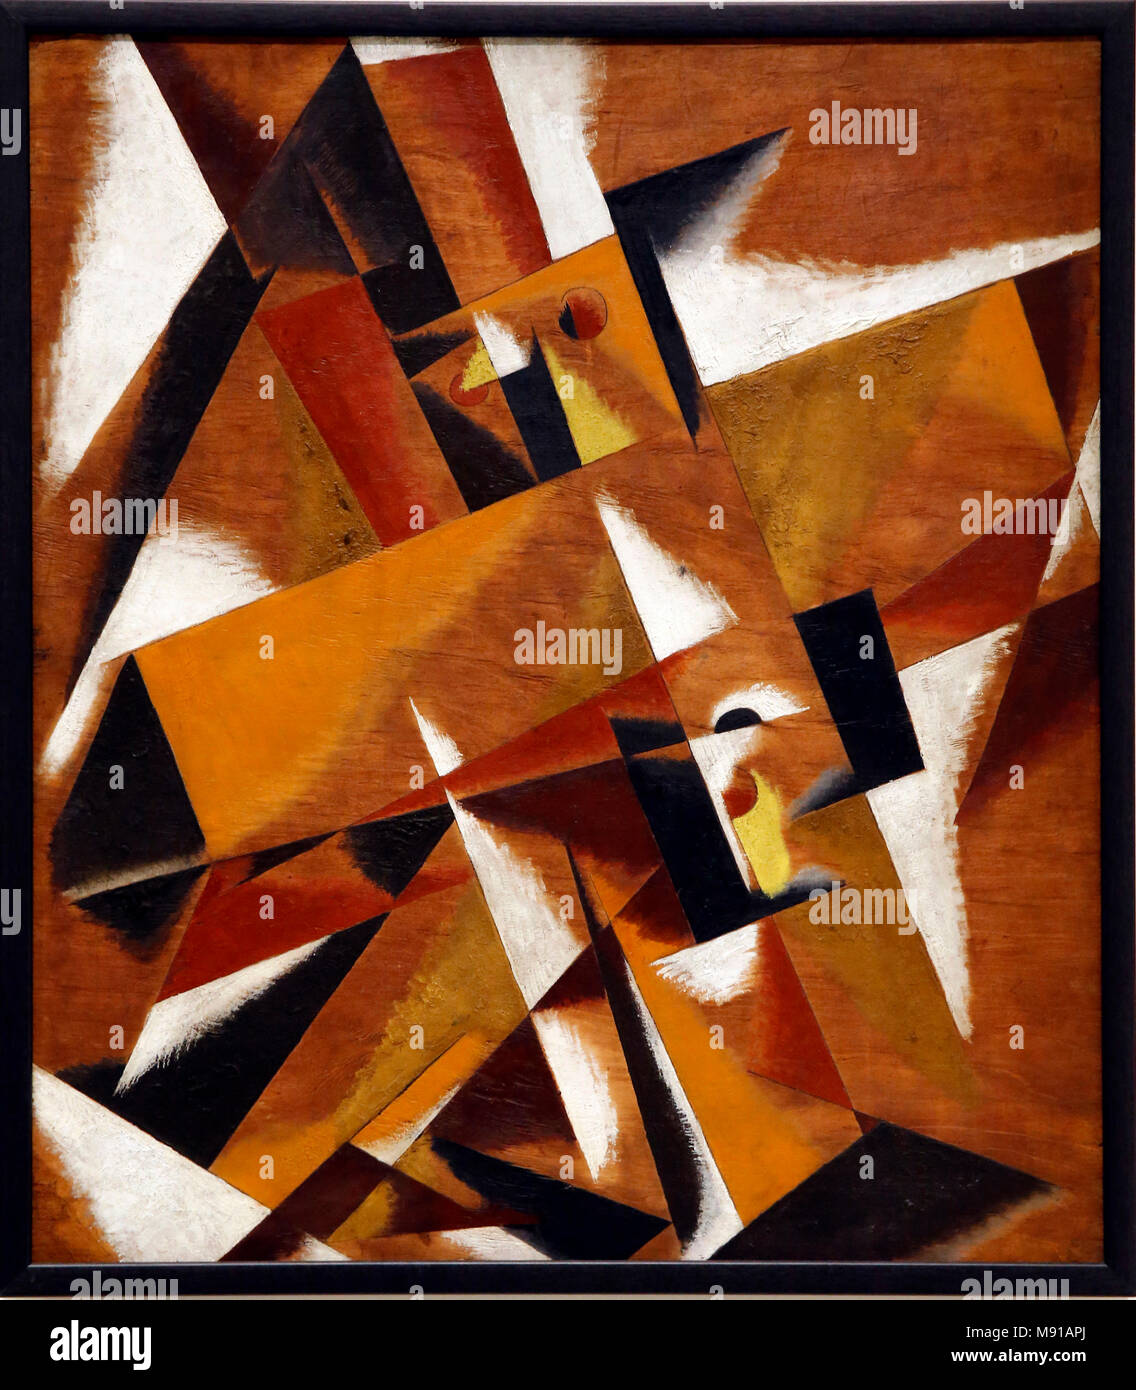 Lioubov Popova, Dimensional and Force Structure, 1921, oil on plywood, Tretiakov National gallery, Moskow. Shot while exhibited in Paris, France. Stock Photo